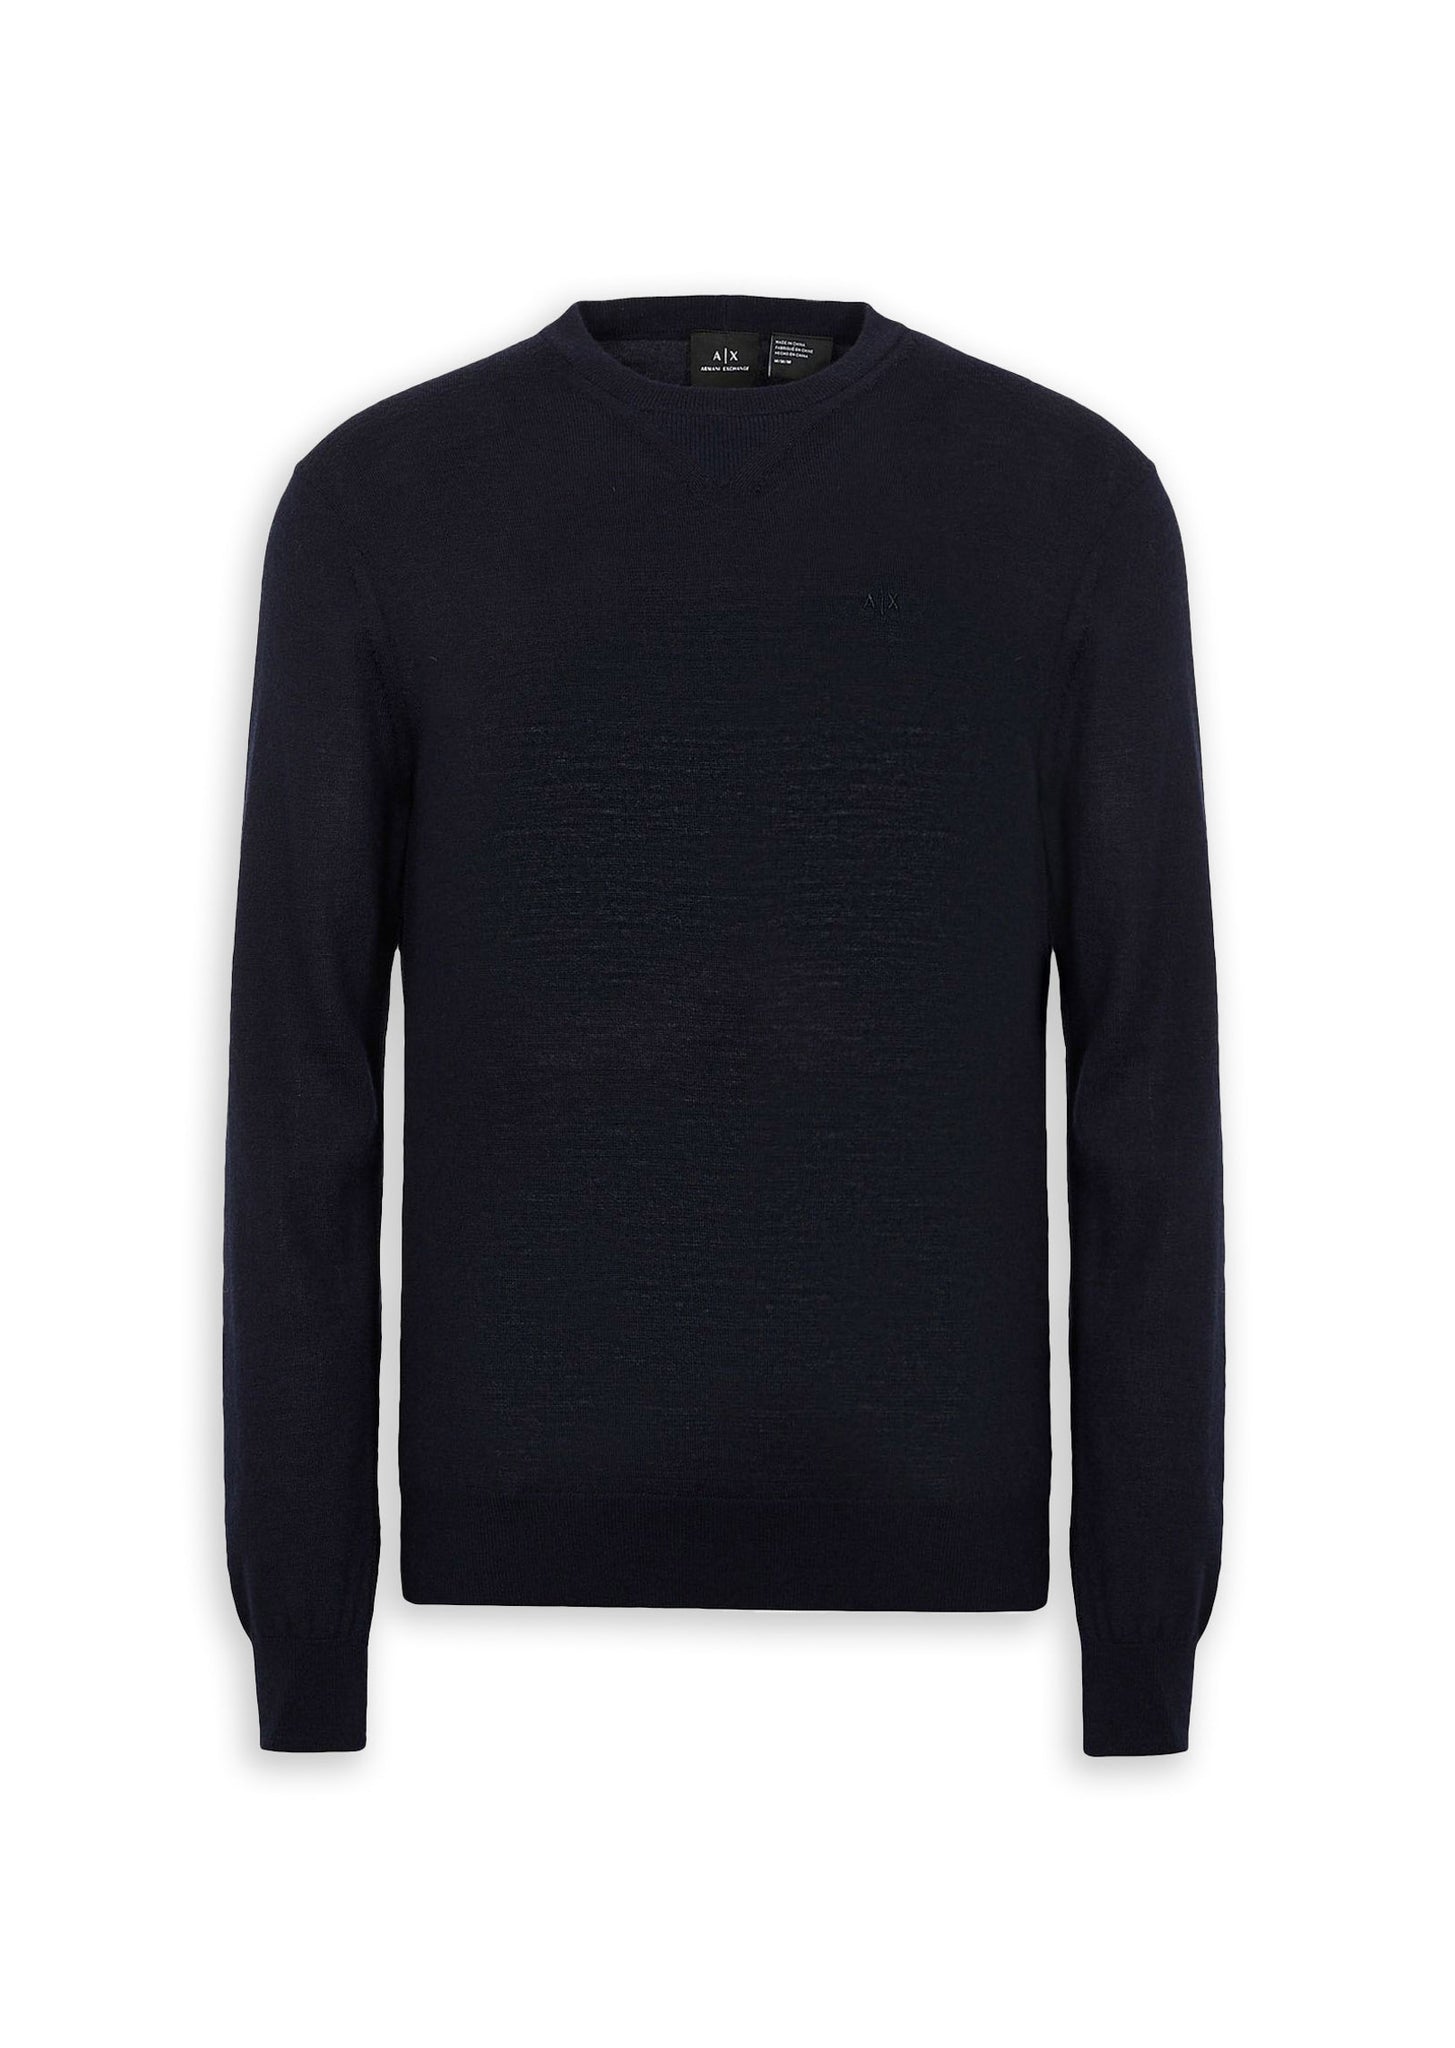 Armani Man Knitted Blue Men's Pullover